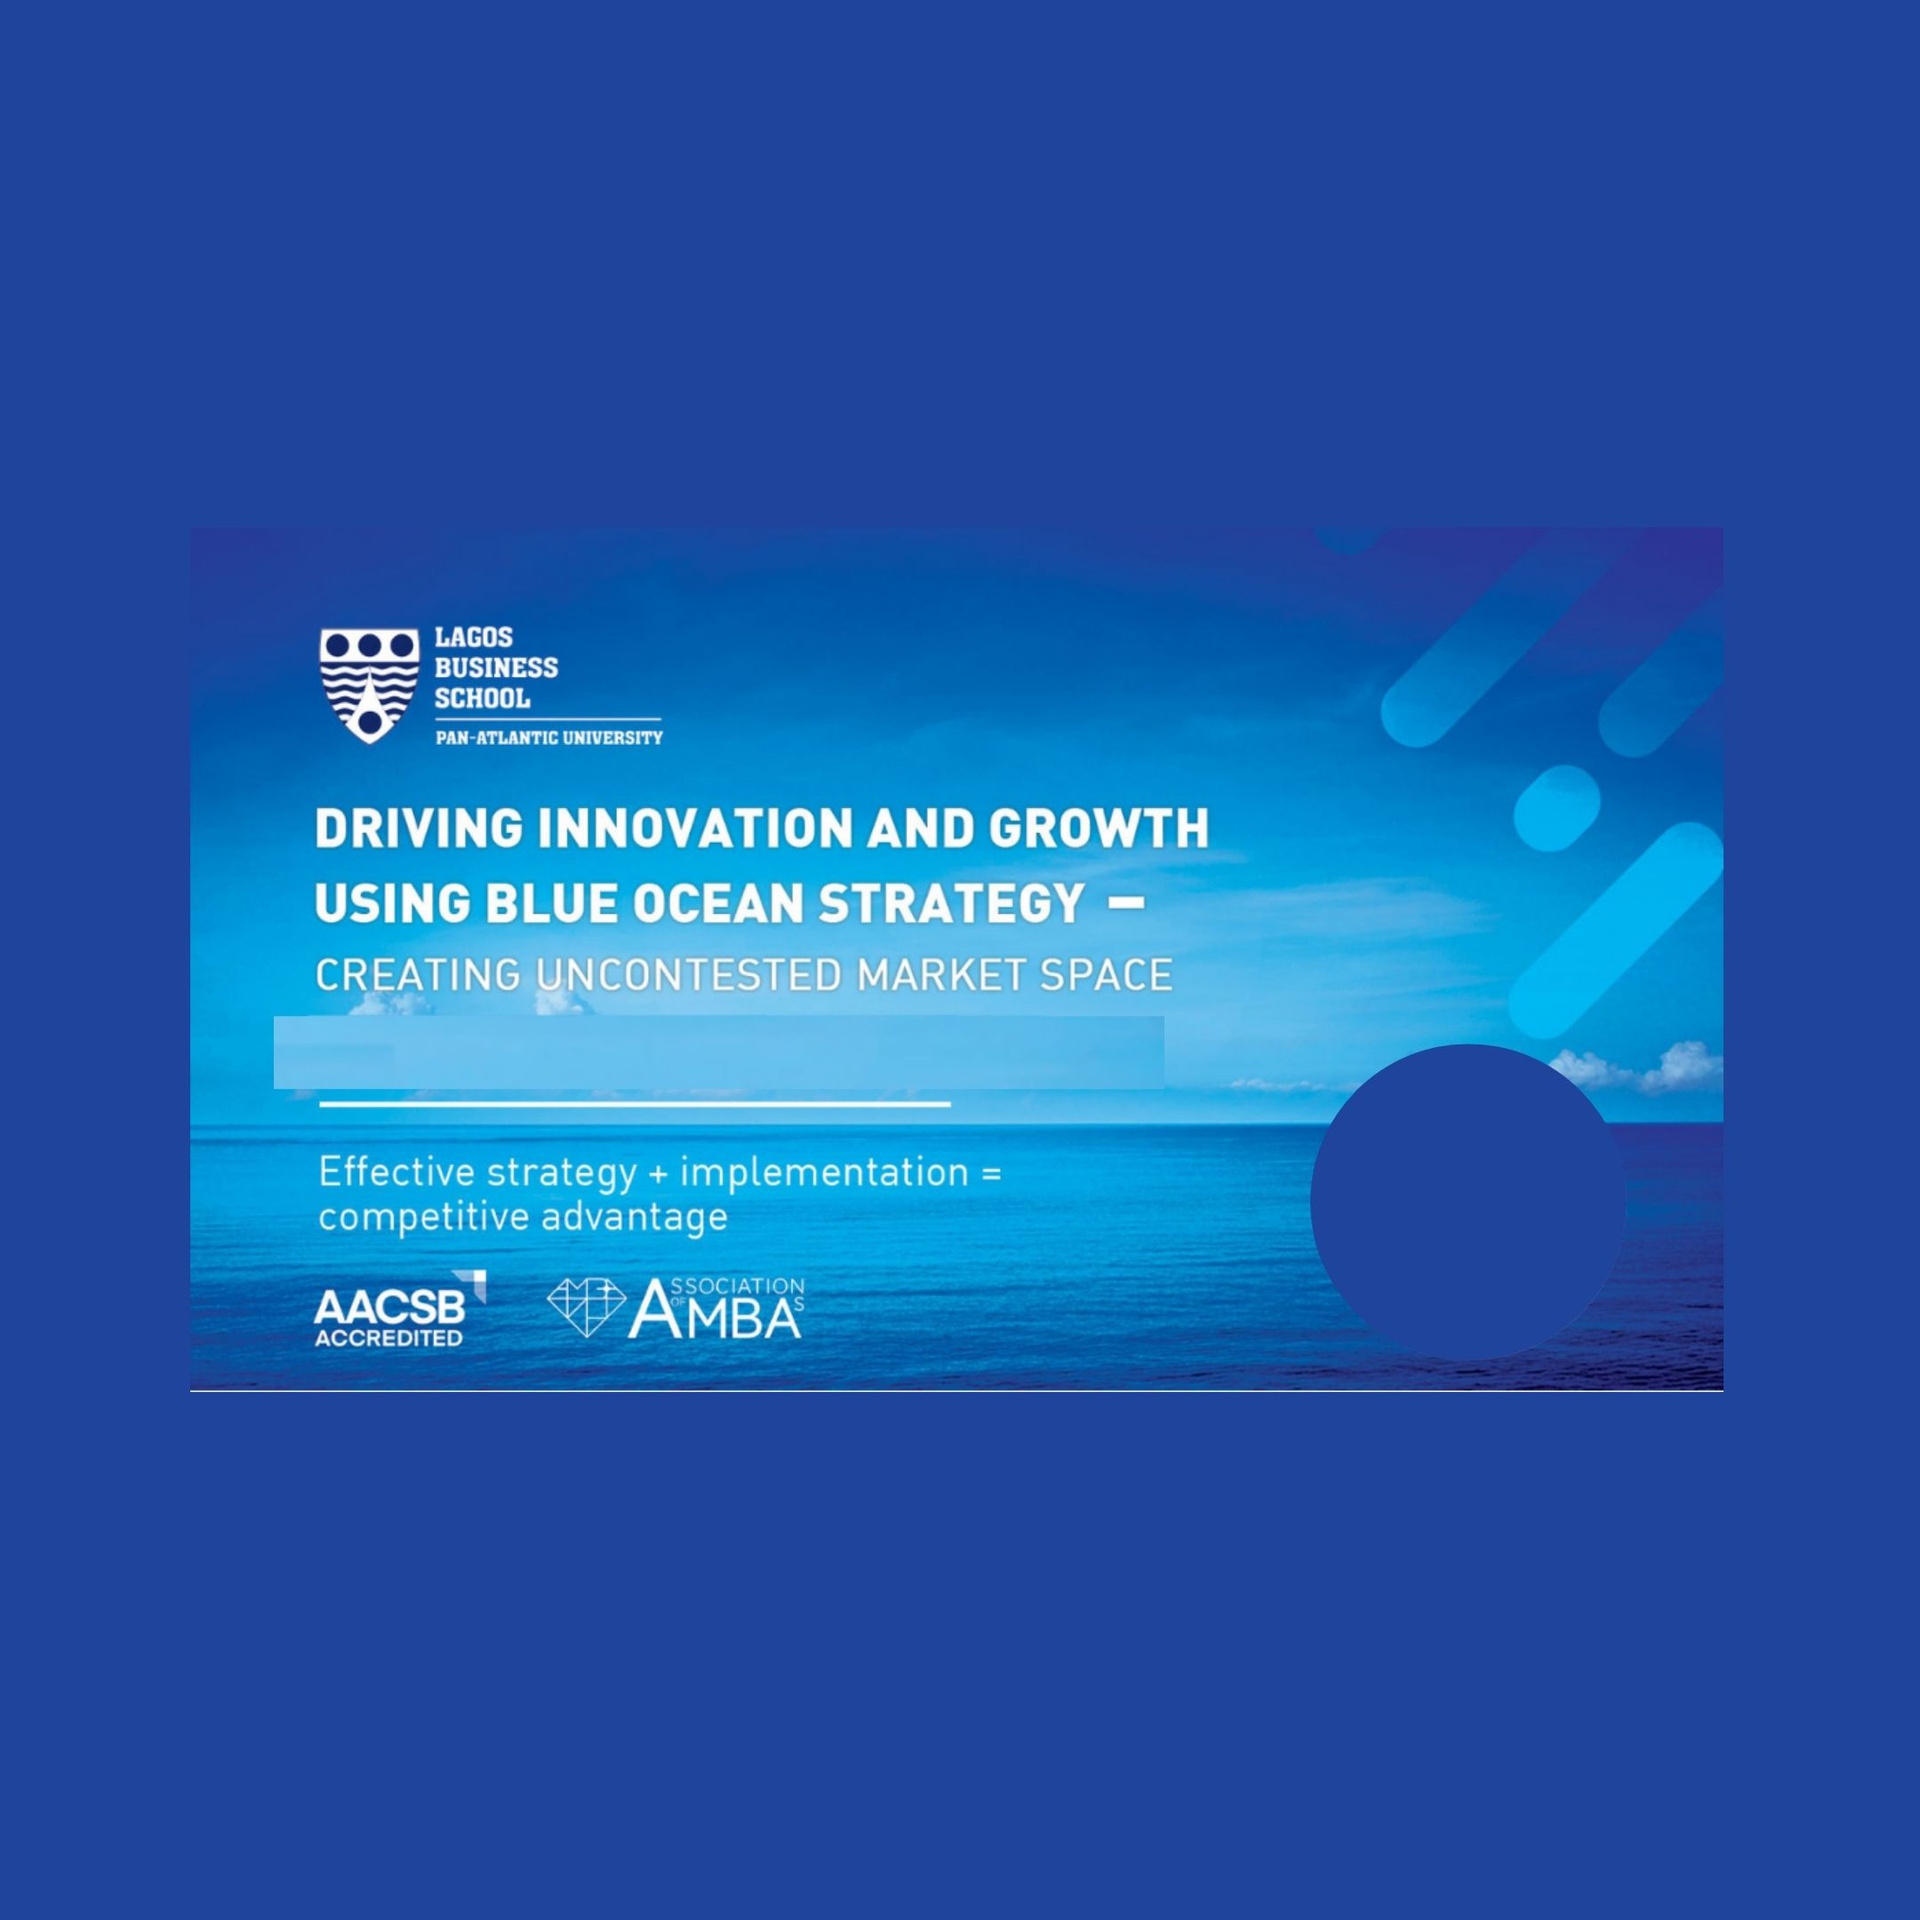 Driving Innovation and Growth using Blue Ocean Strategy - Creating Uncontested Market Space